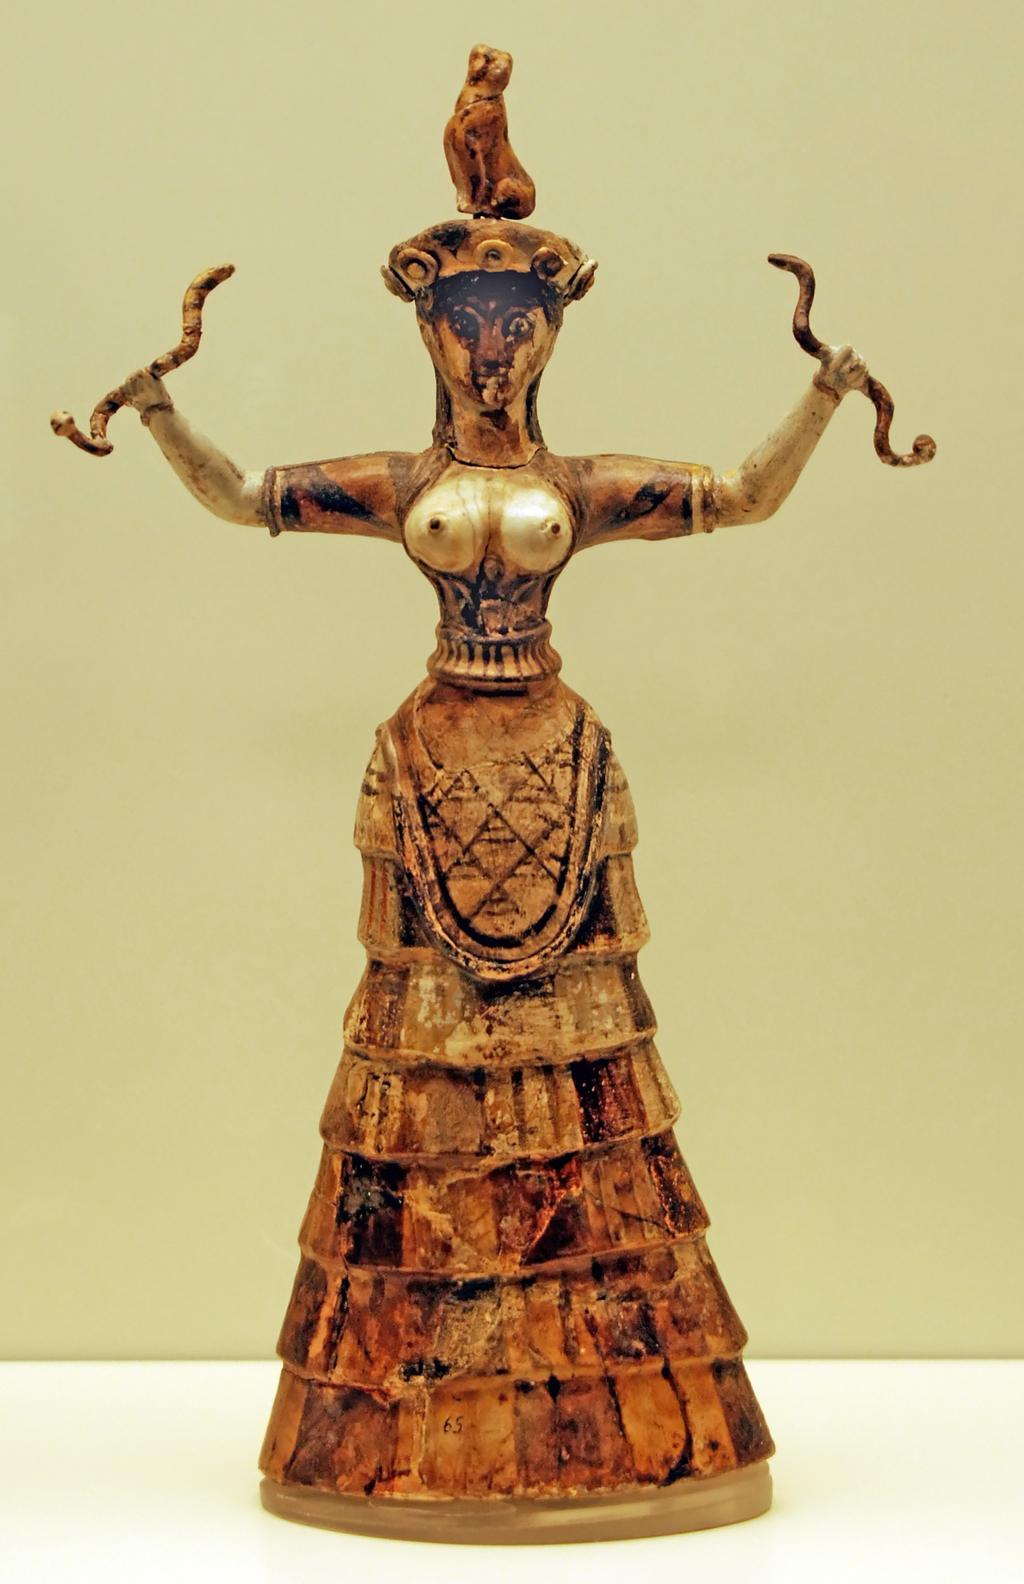 Minoan remains indicate that Minoan clothing fit the contours of the body and required knowledge of sewing techniques.